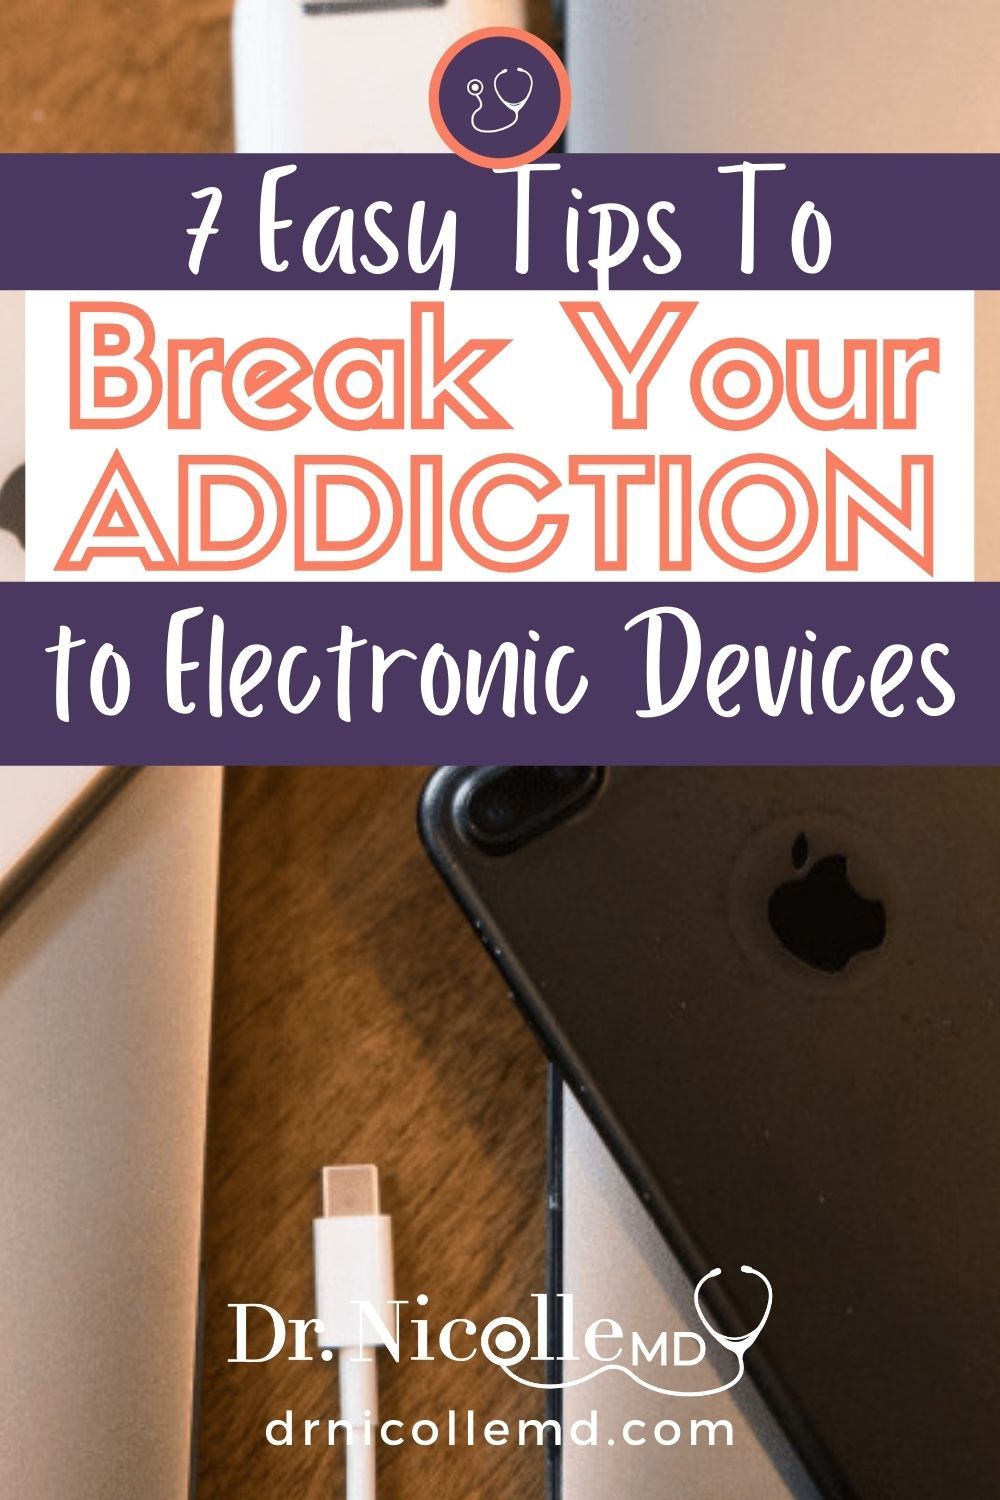 7 Easy Tips To Break Your Addiction to Electronic Devices